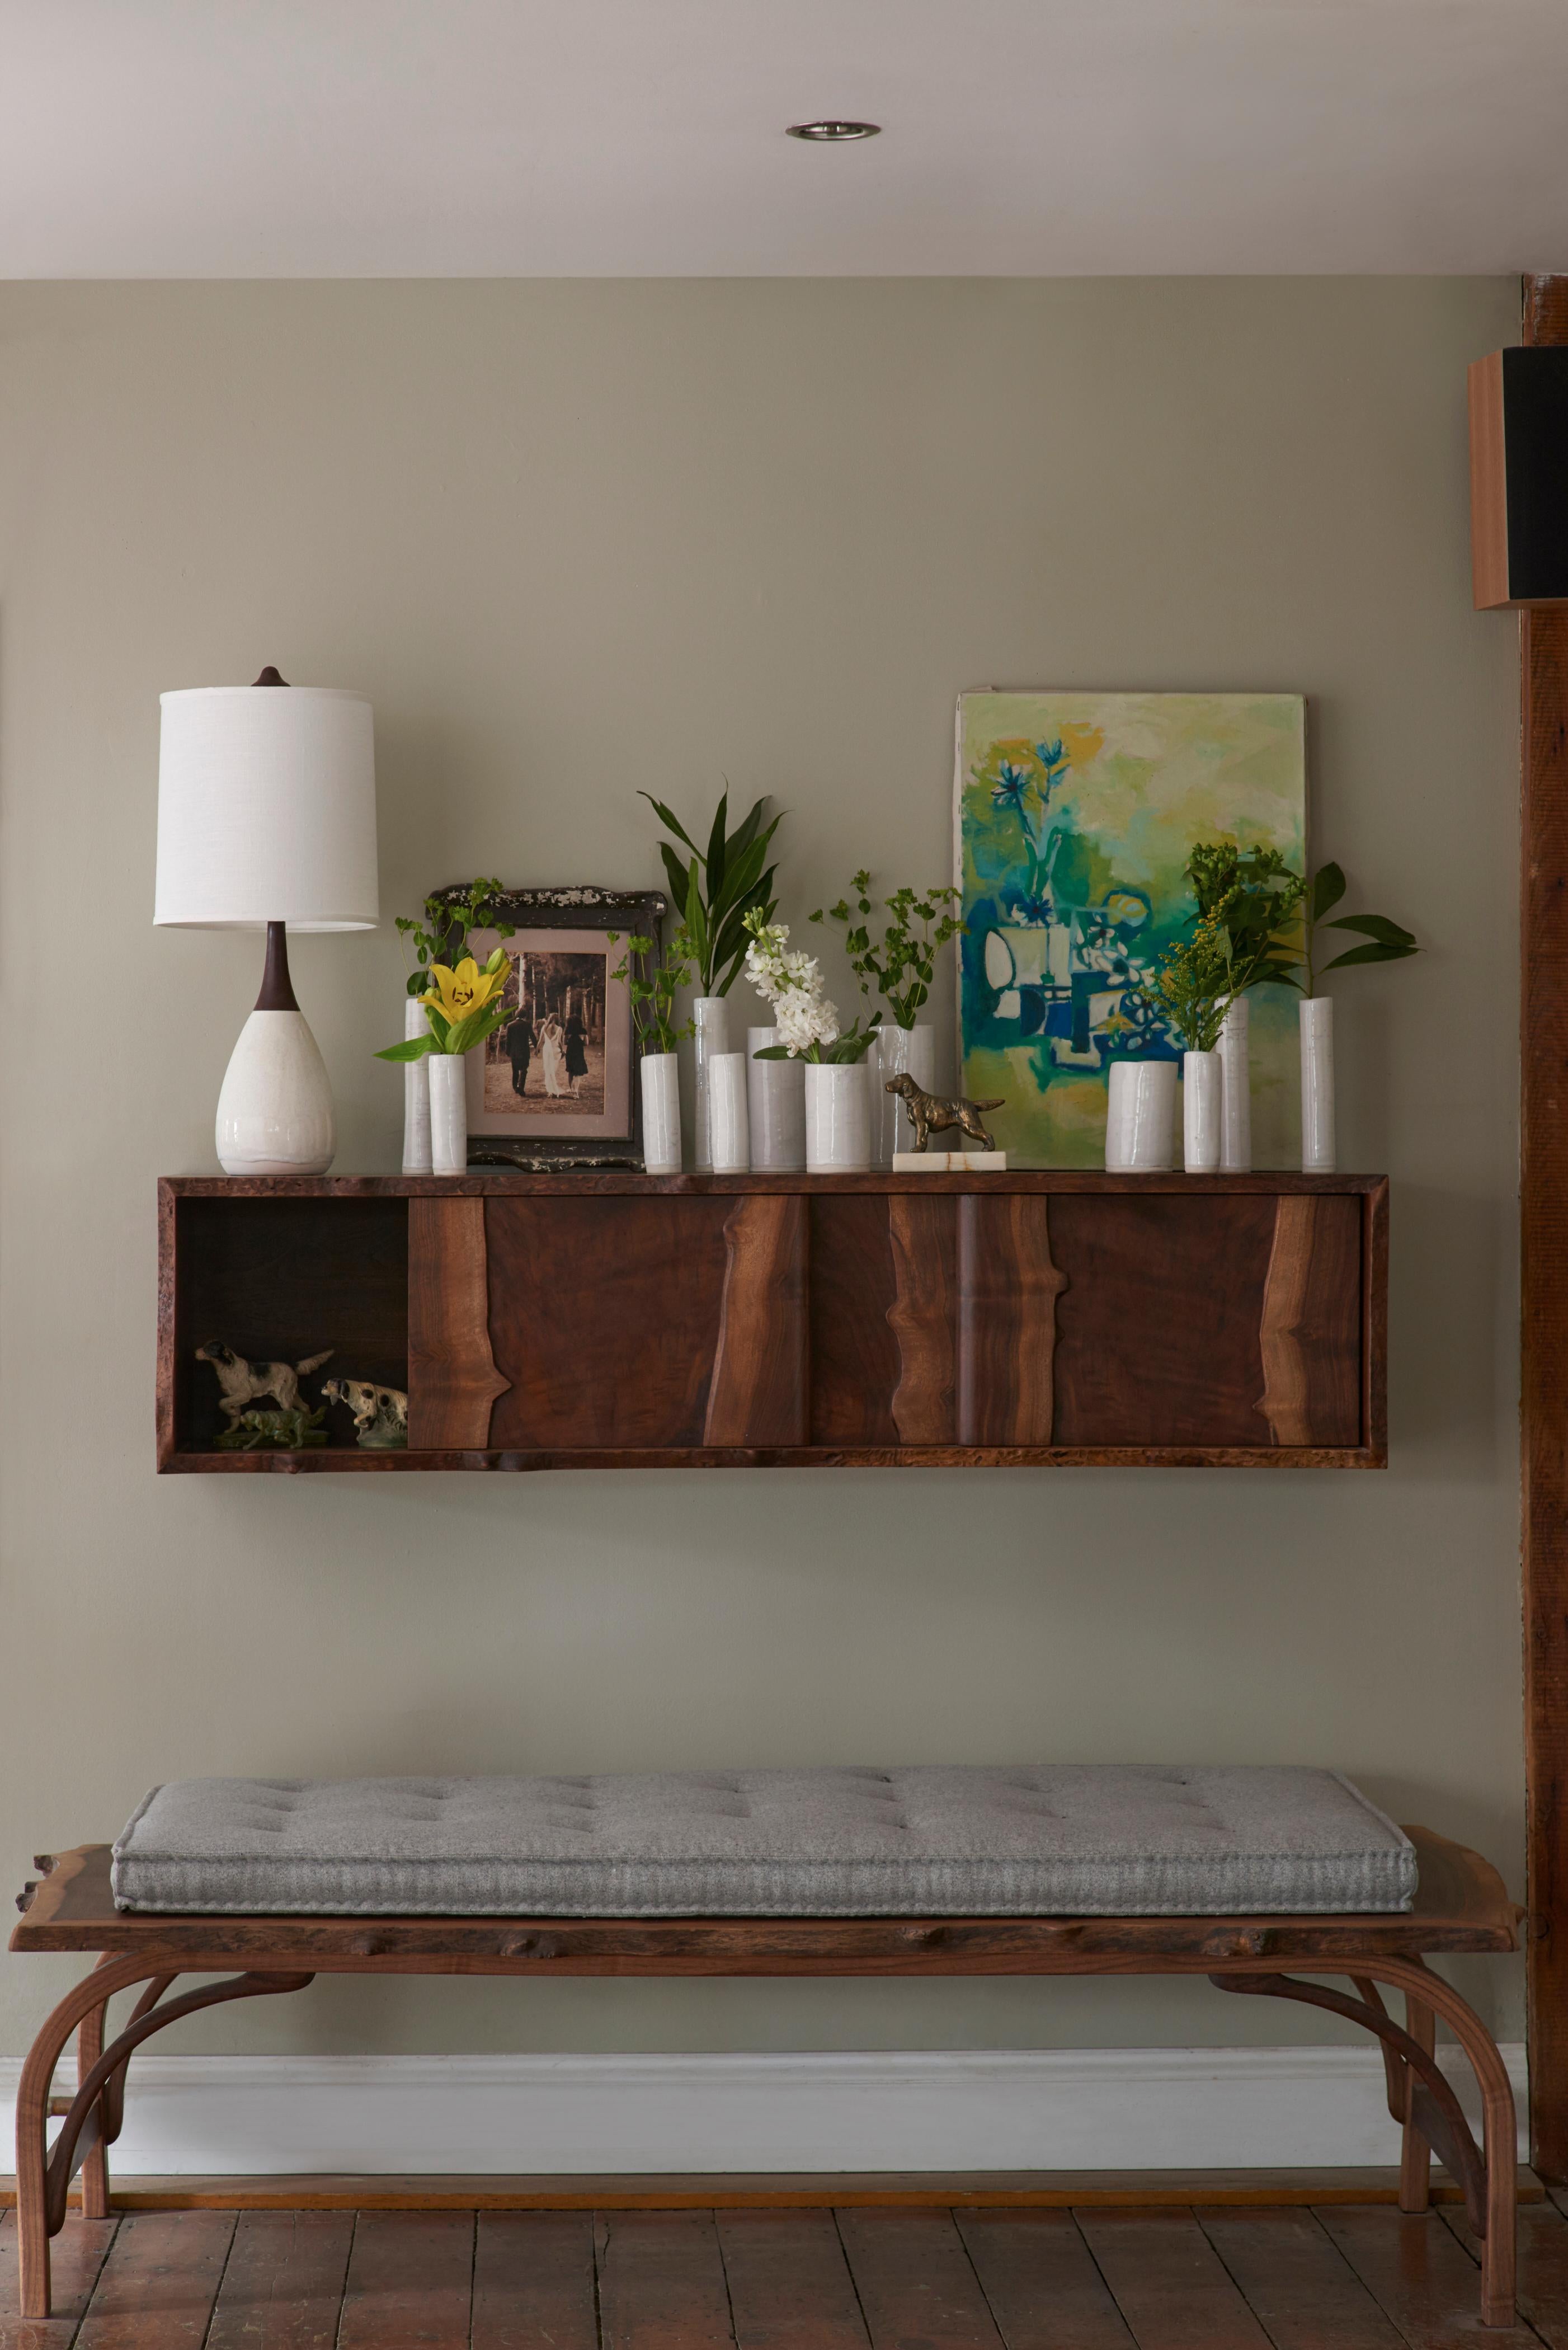 When floor space is limited hang it on the wall. Hang low below your flat screen TV, a bit higher in the dining room or entryway, or higher still combining mutiples as shelving. This piece features highly figured live edge claro walnut with three